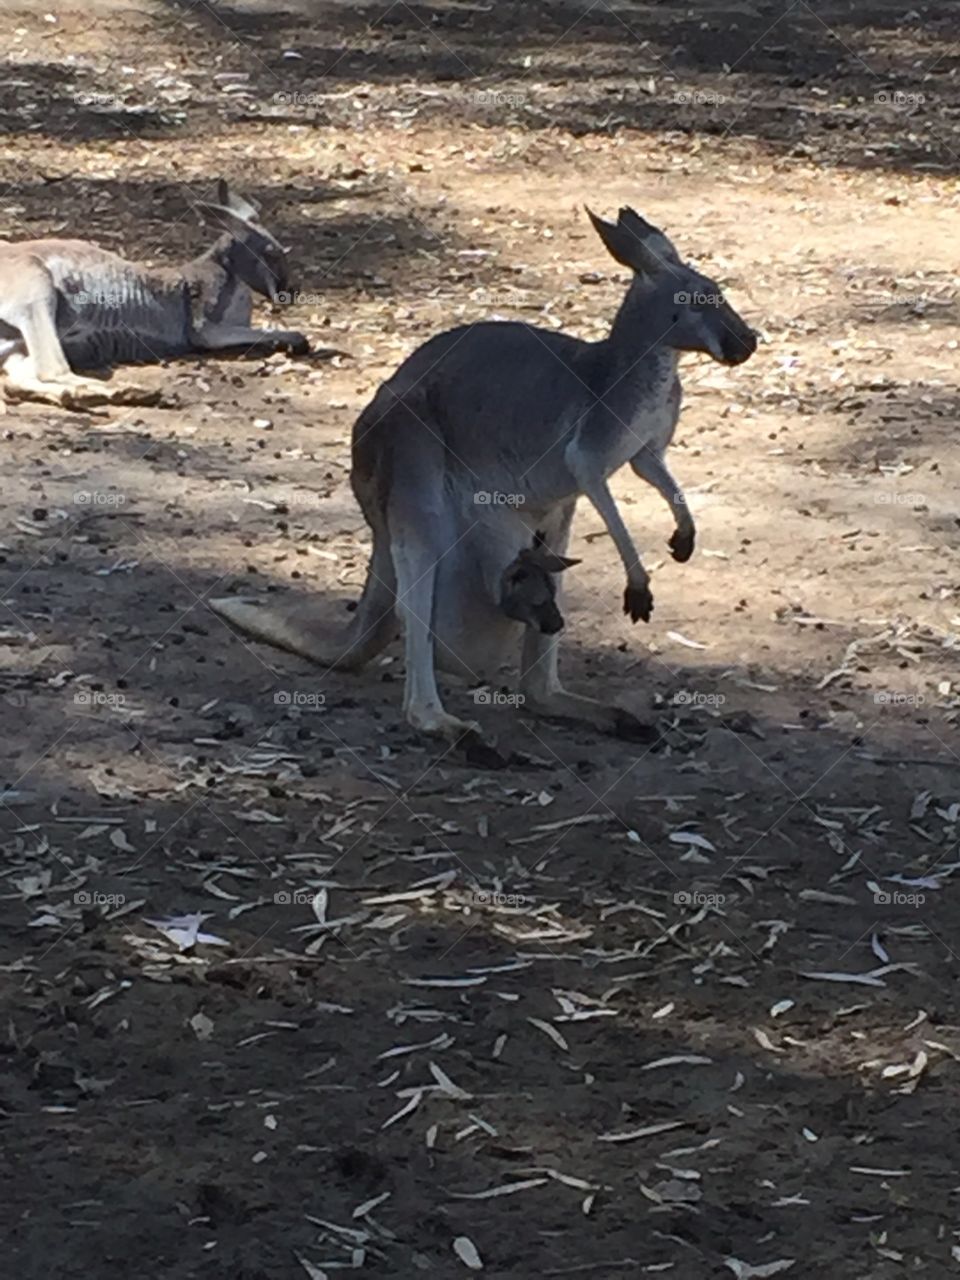 A kangaroo we came across with the cutest baby